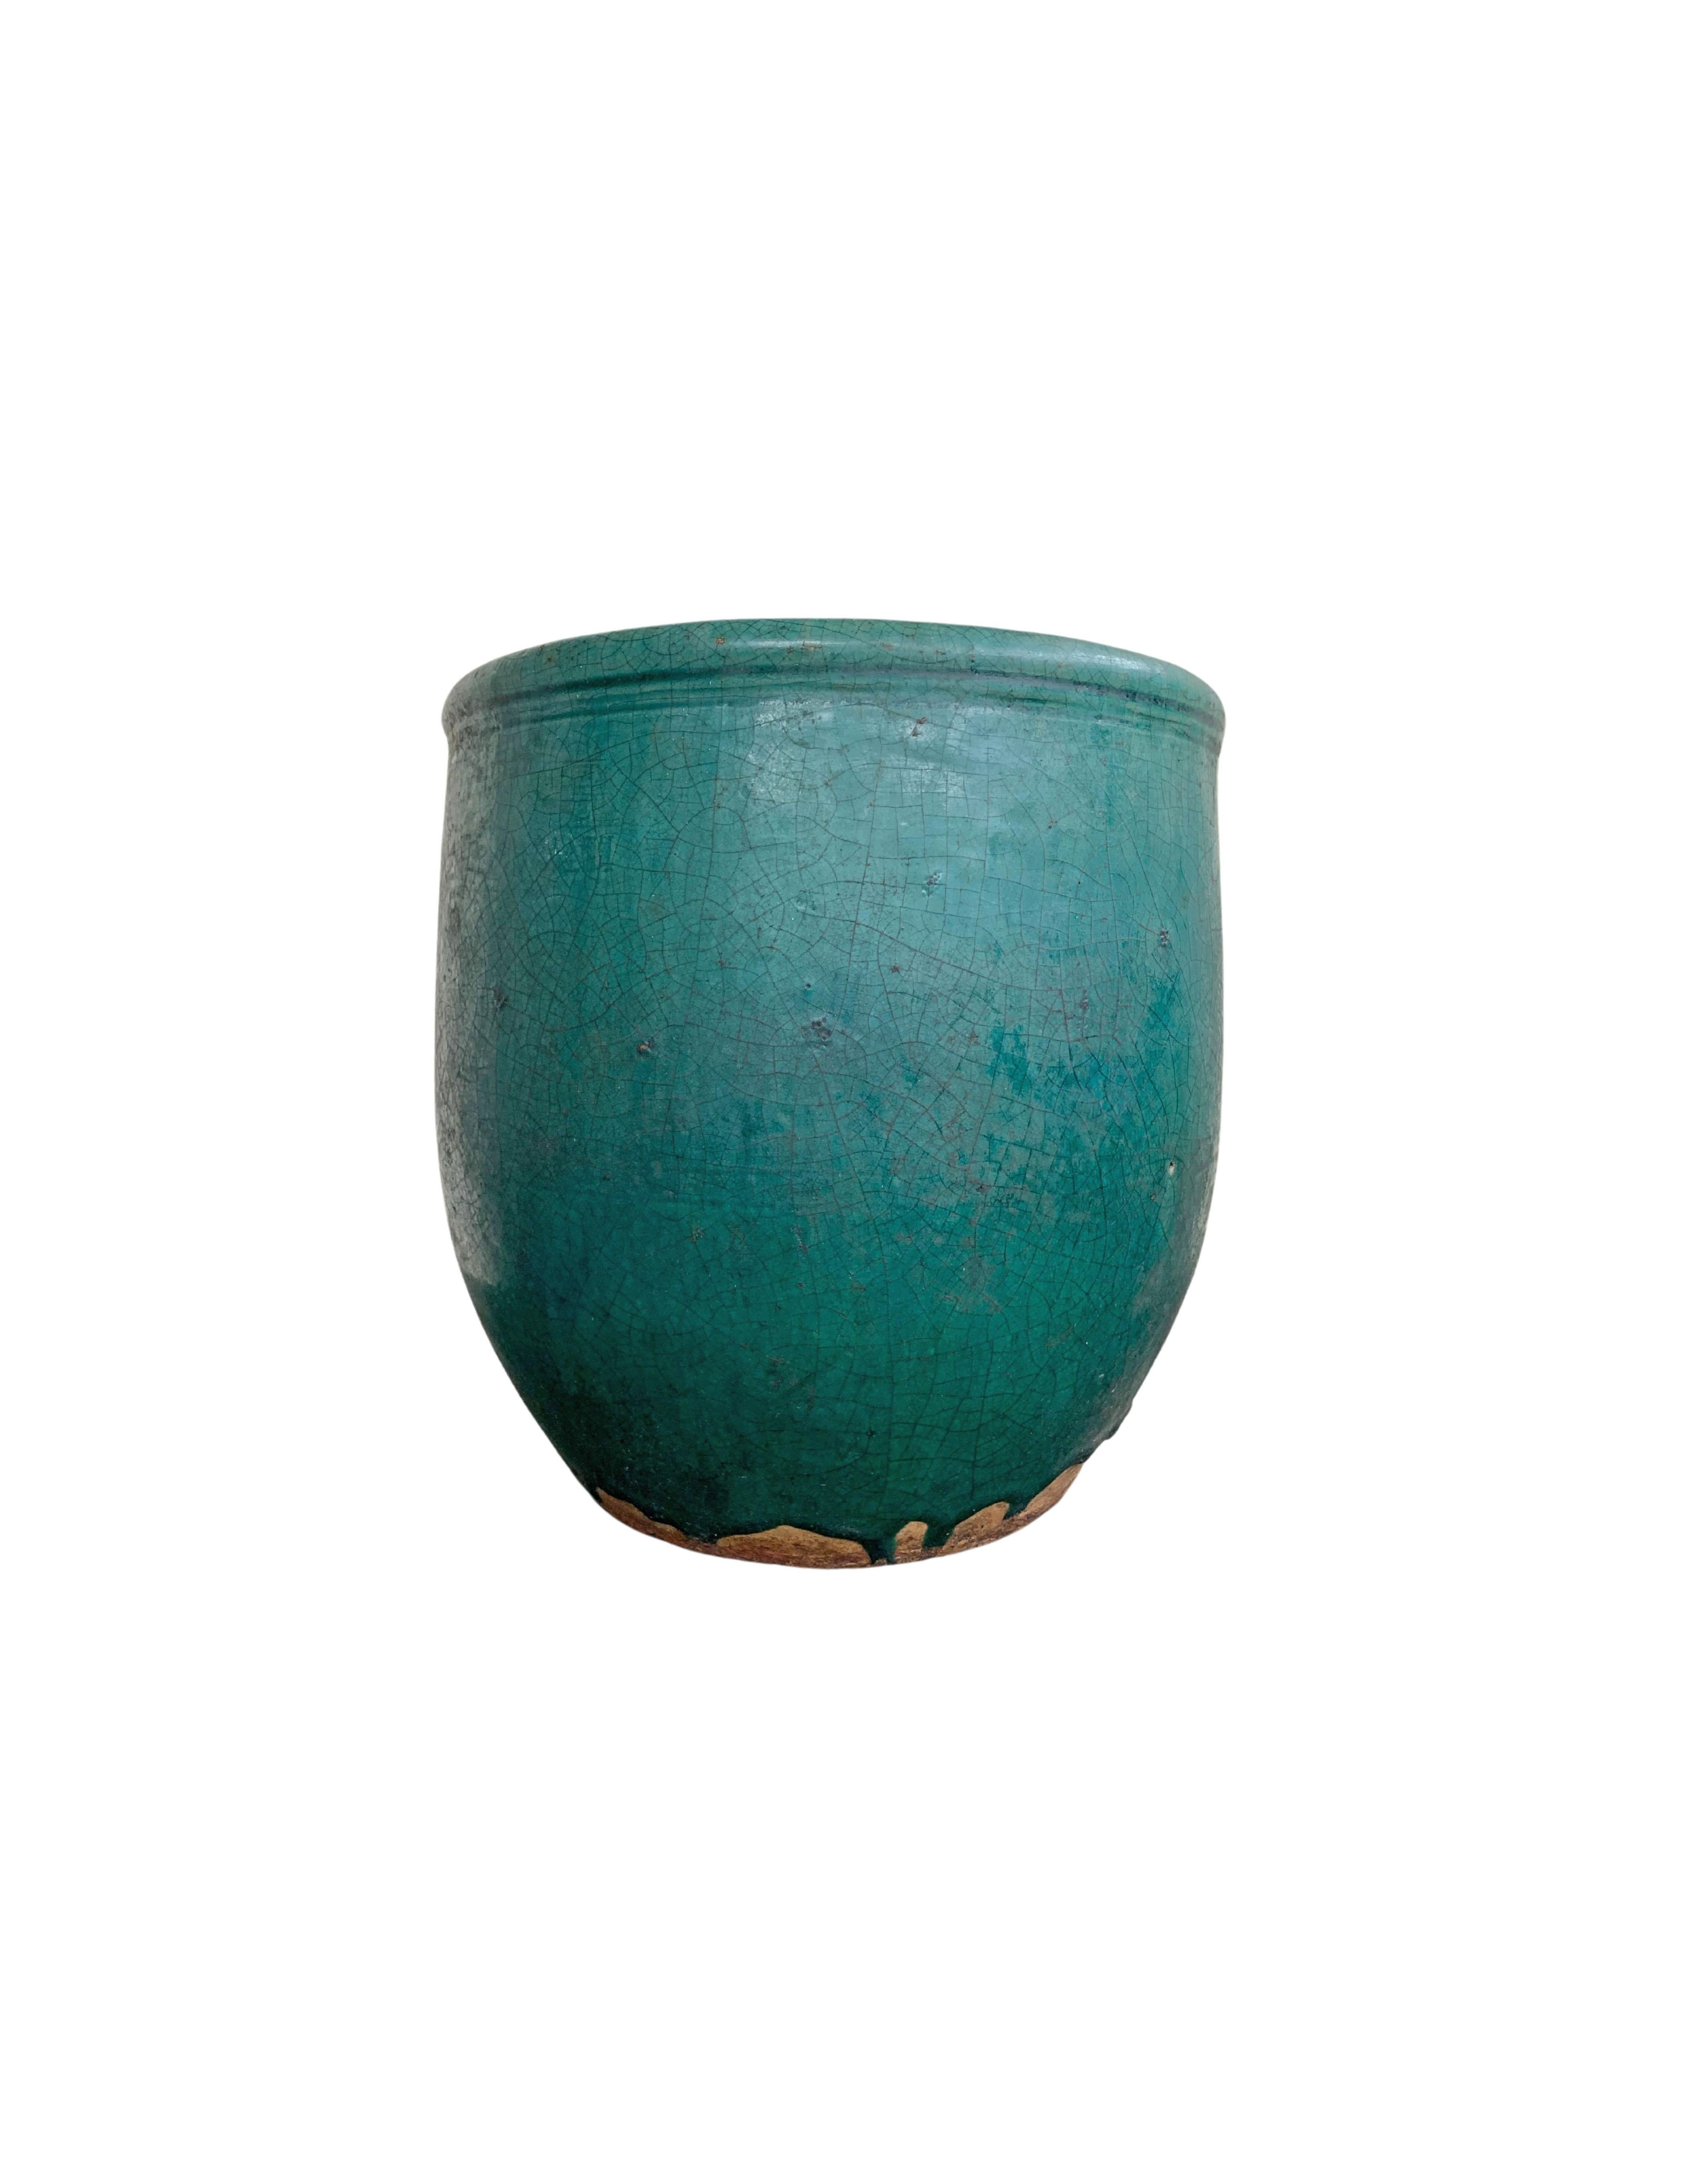 Chinese Green Glazed Jar / Planter, c. 1900 For Sale 1